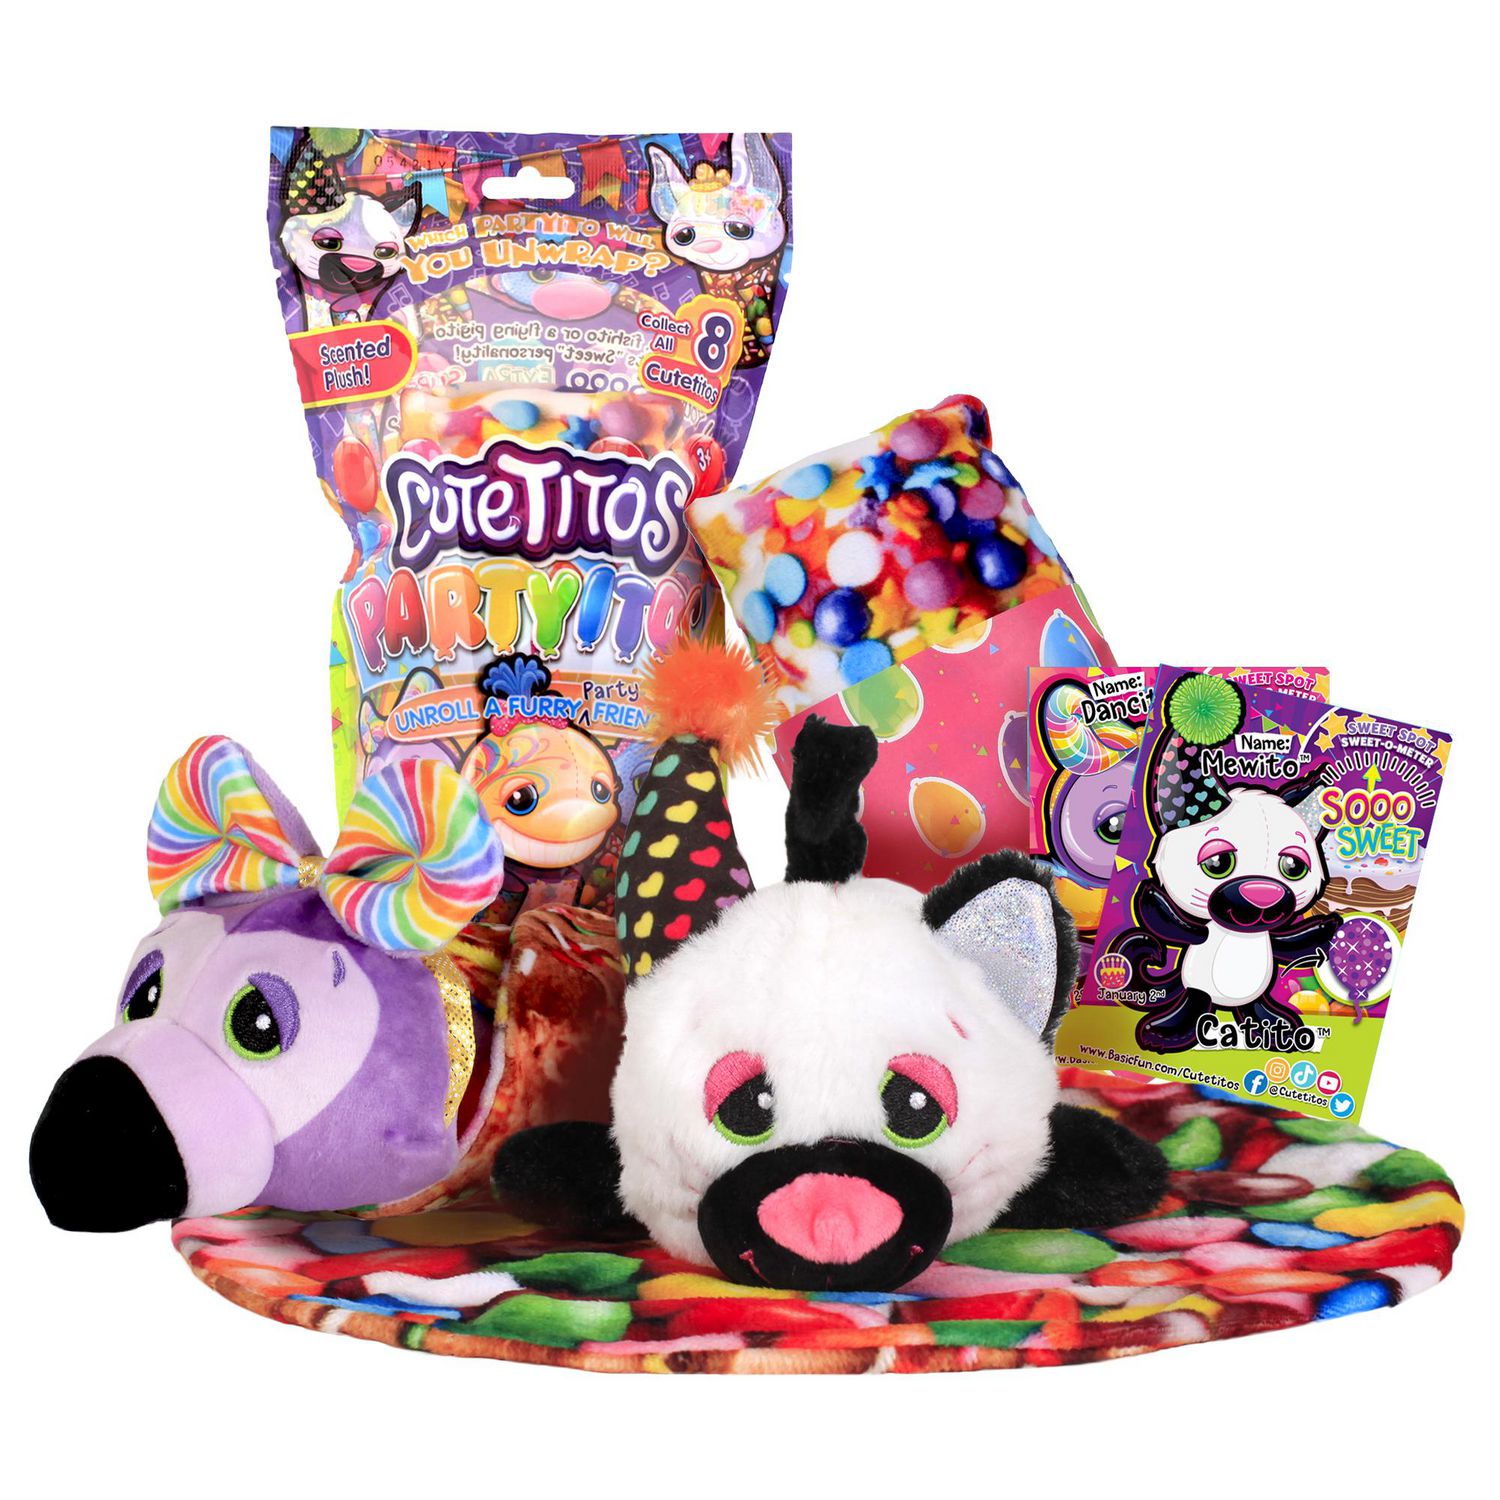 SCENTED Cutetitos Partyitos - Surprise Stuffed Animals - Collectible  Party-Themed Plush Animals | Walmart Canada